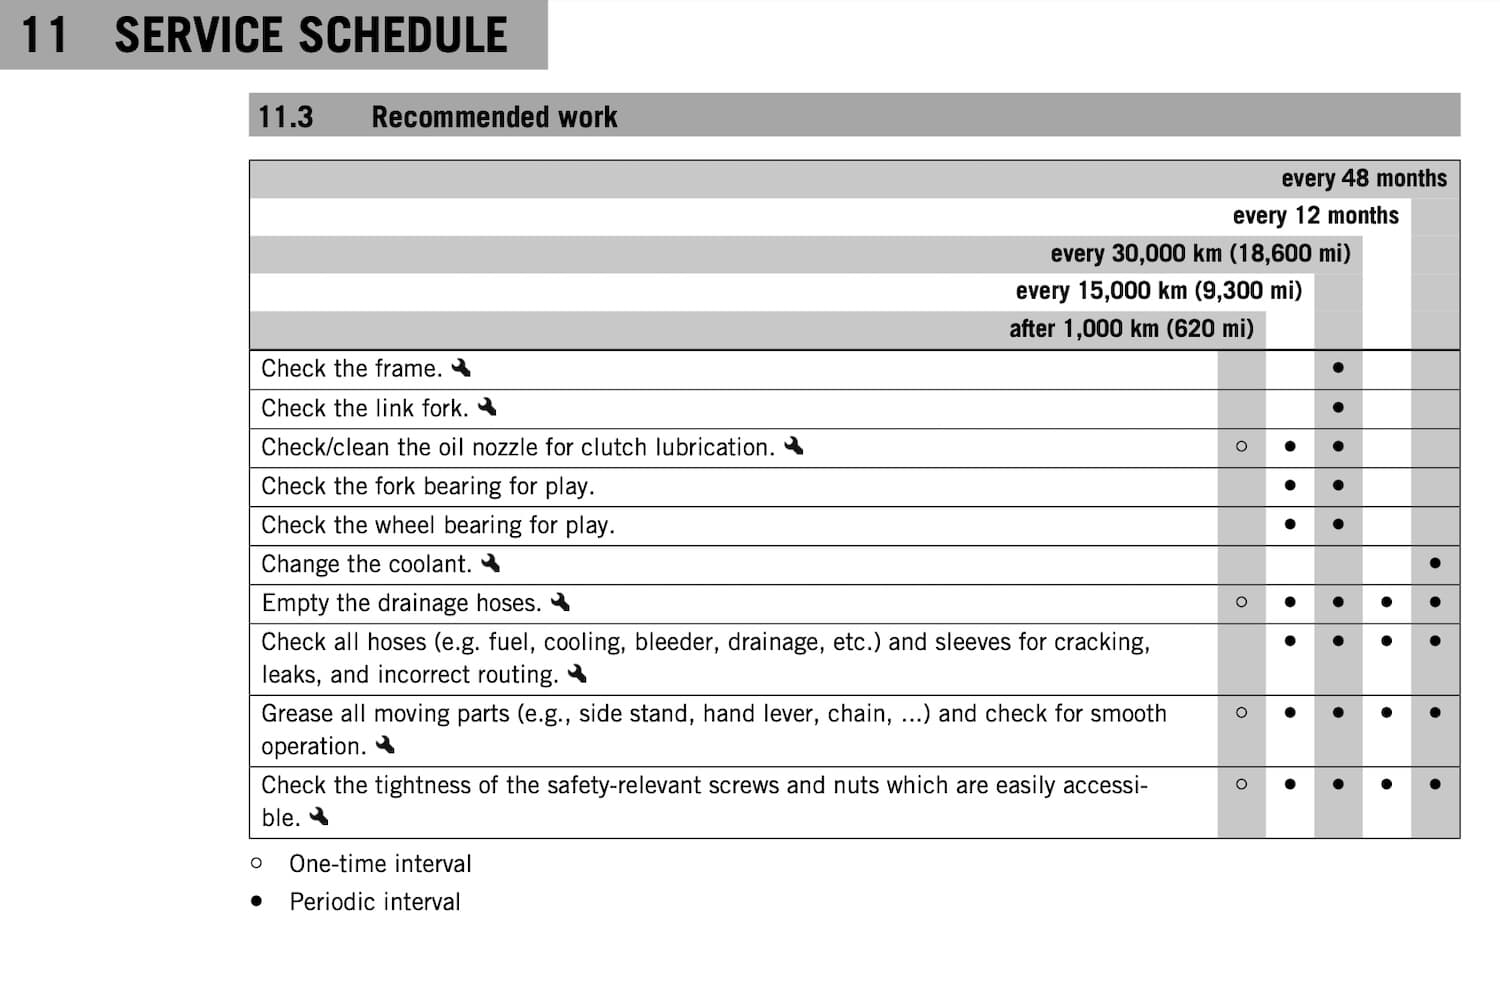 KTM 890 Adventure R and Rally maintenance schedule screenshot recommended work